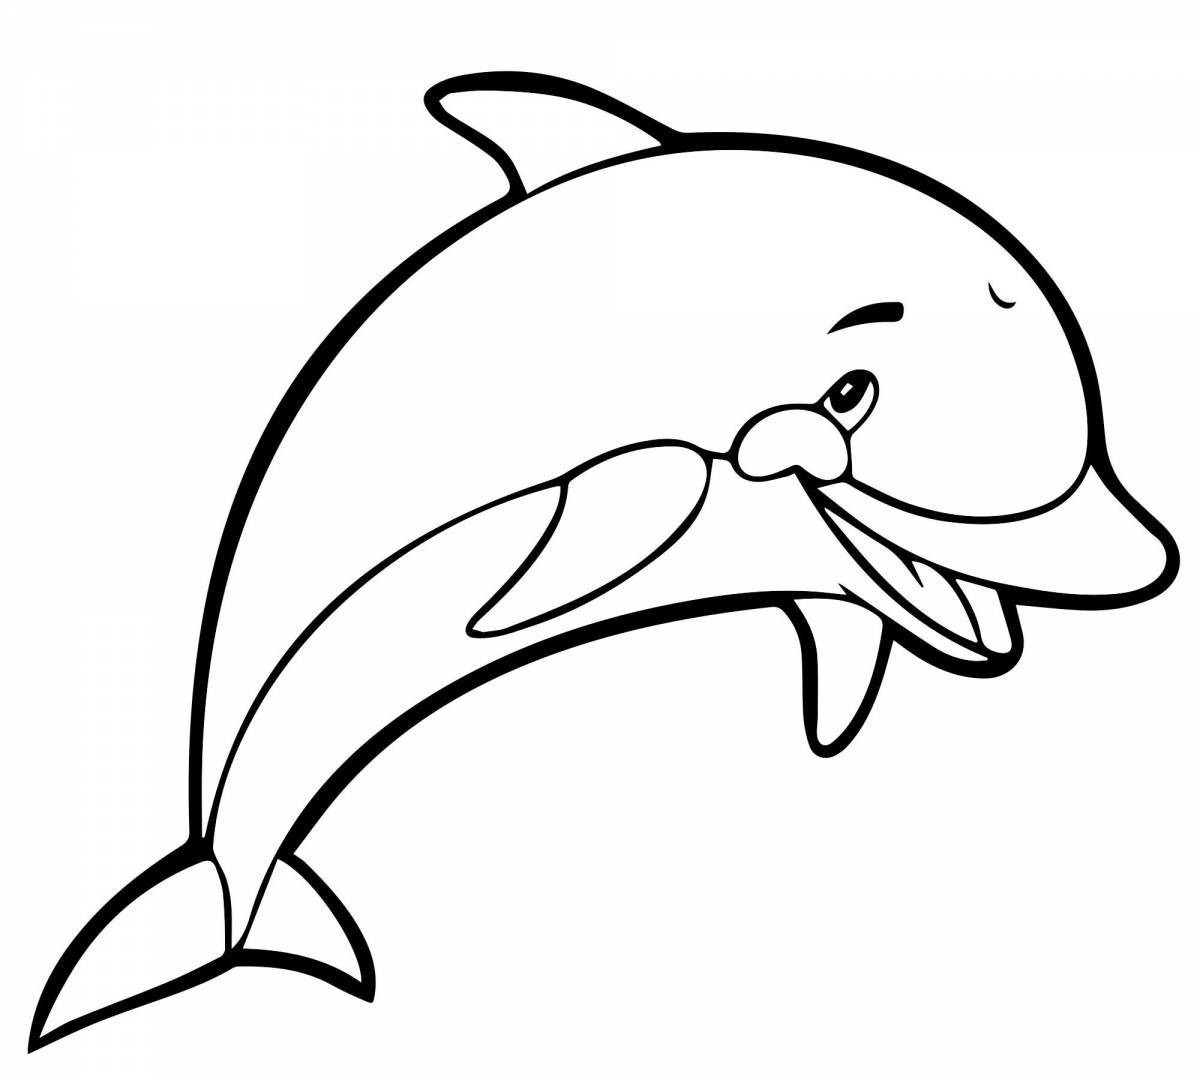 Dolphin for kids #3